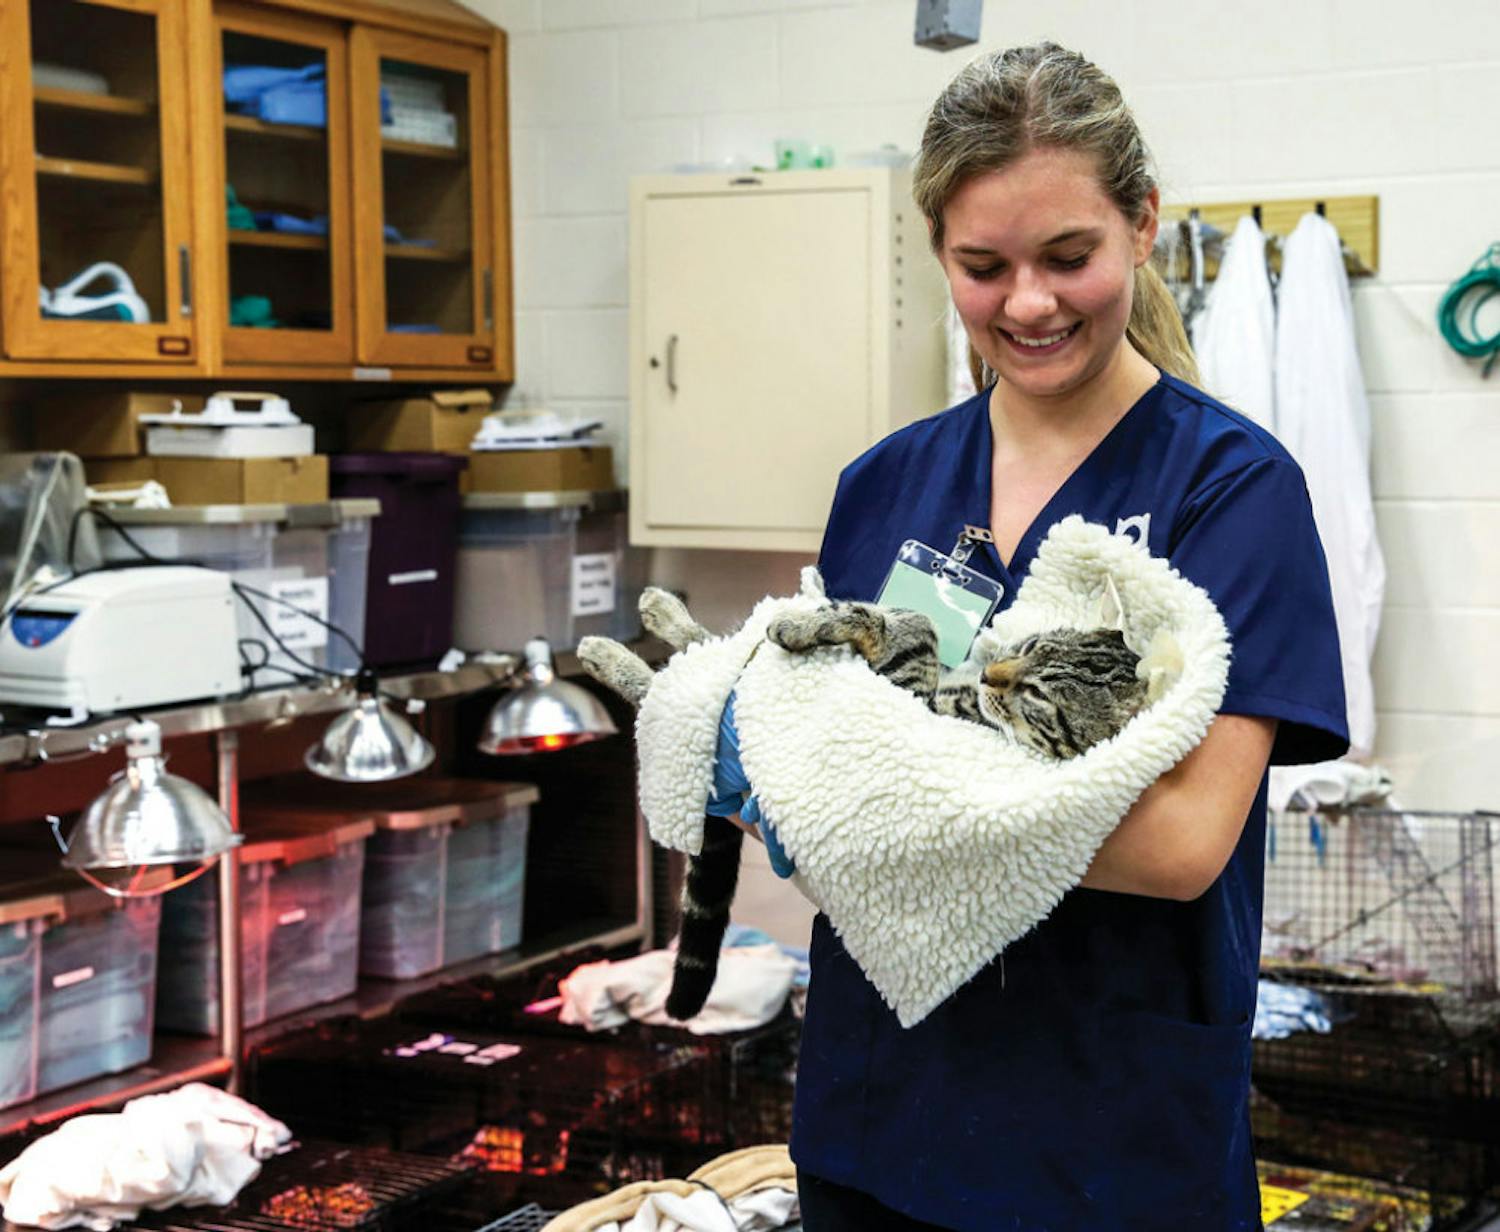 Every month, an average of 100 volunteers help spay, neuter and vaccinate an average of 200 cats per event.